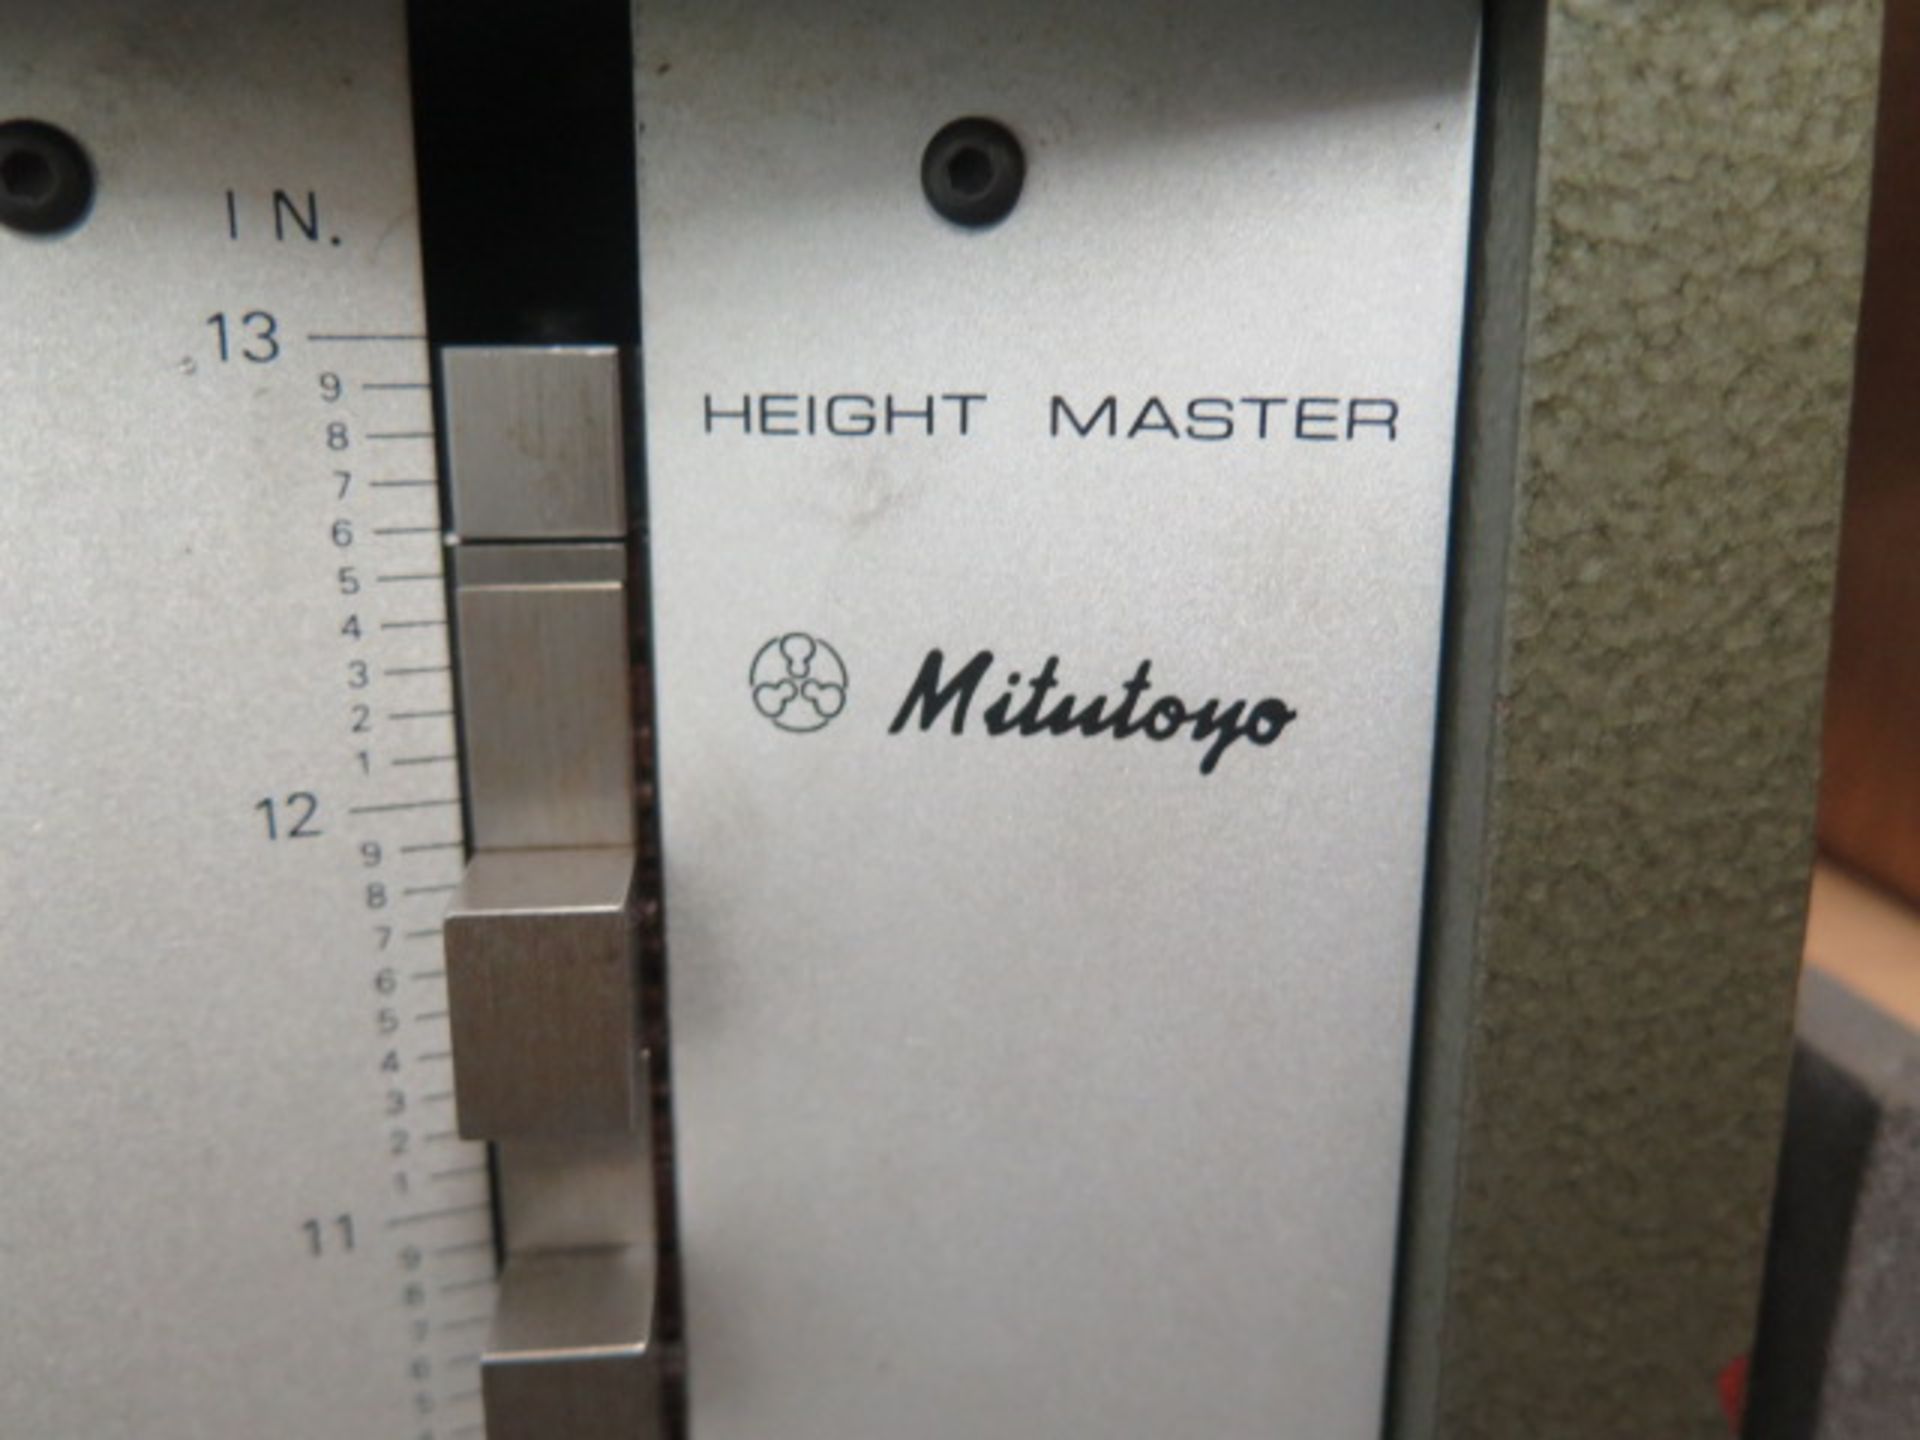 Mitutoyo 13” Height Master (SOLD AS-IS - NO WARRANTY) - Image 5 of 5